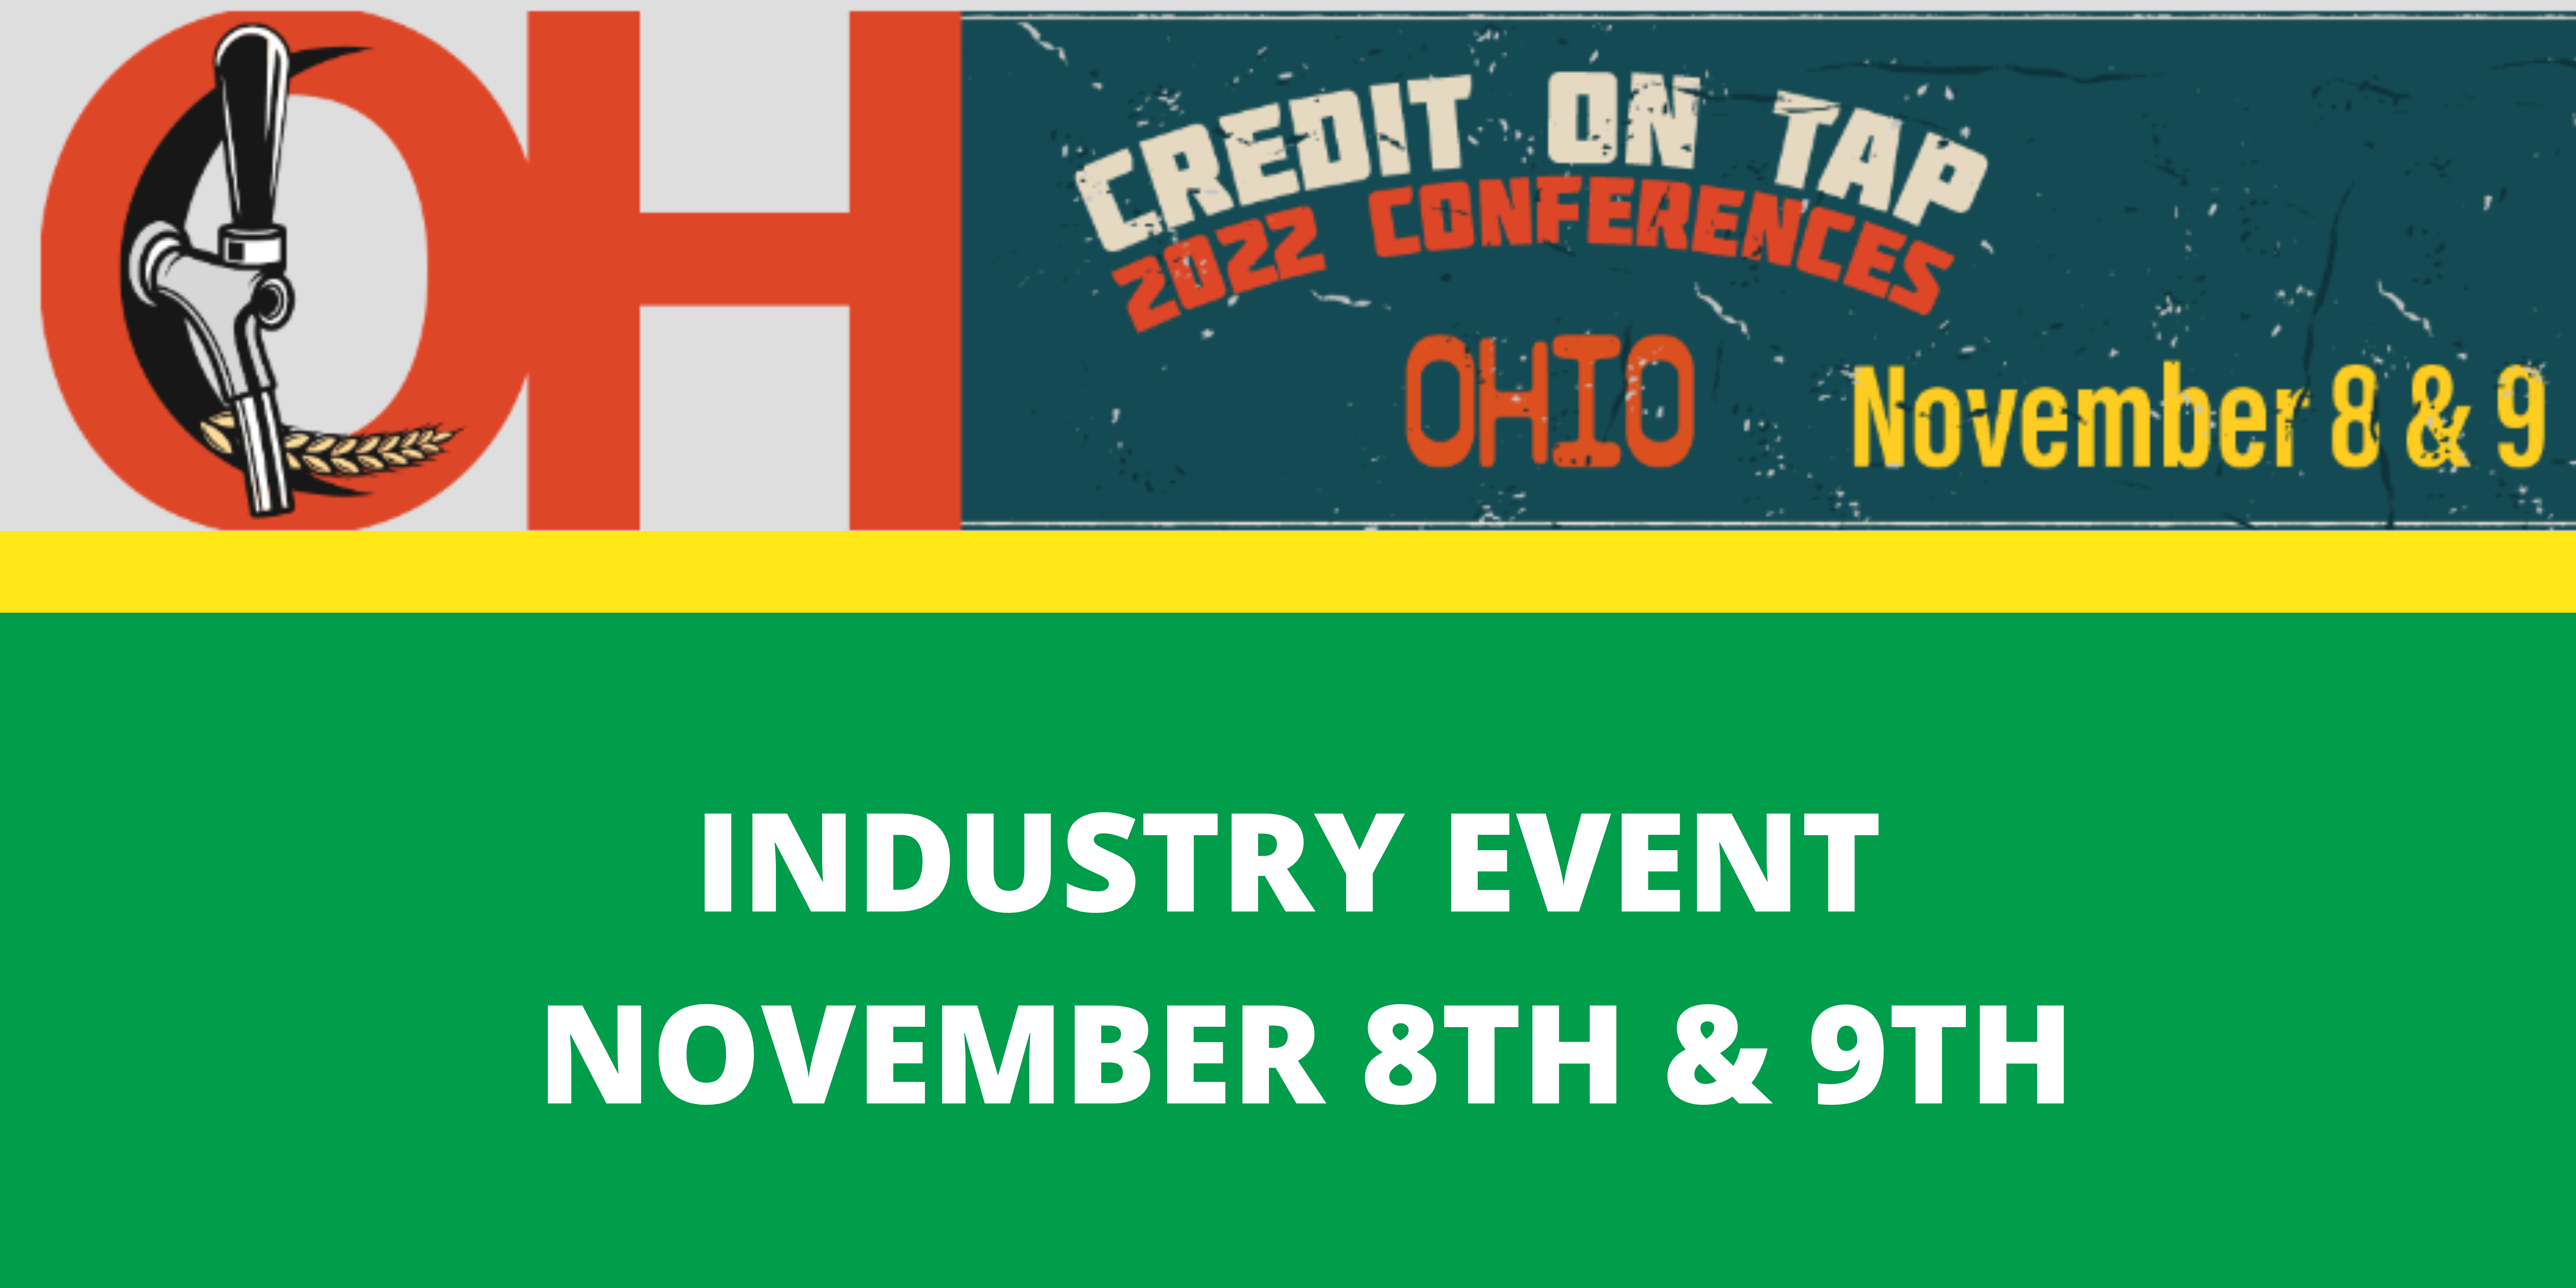 CREDIT ON TAP CONFERENCE COLUMBUS, OH